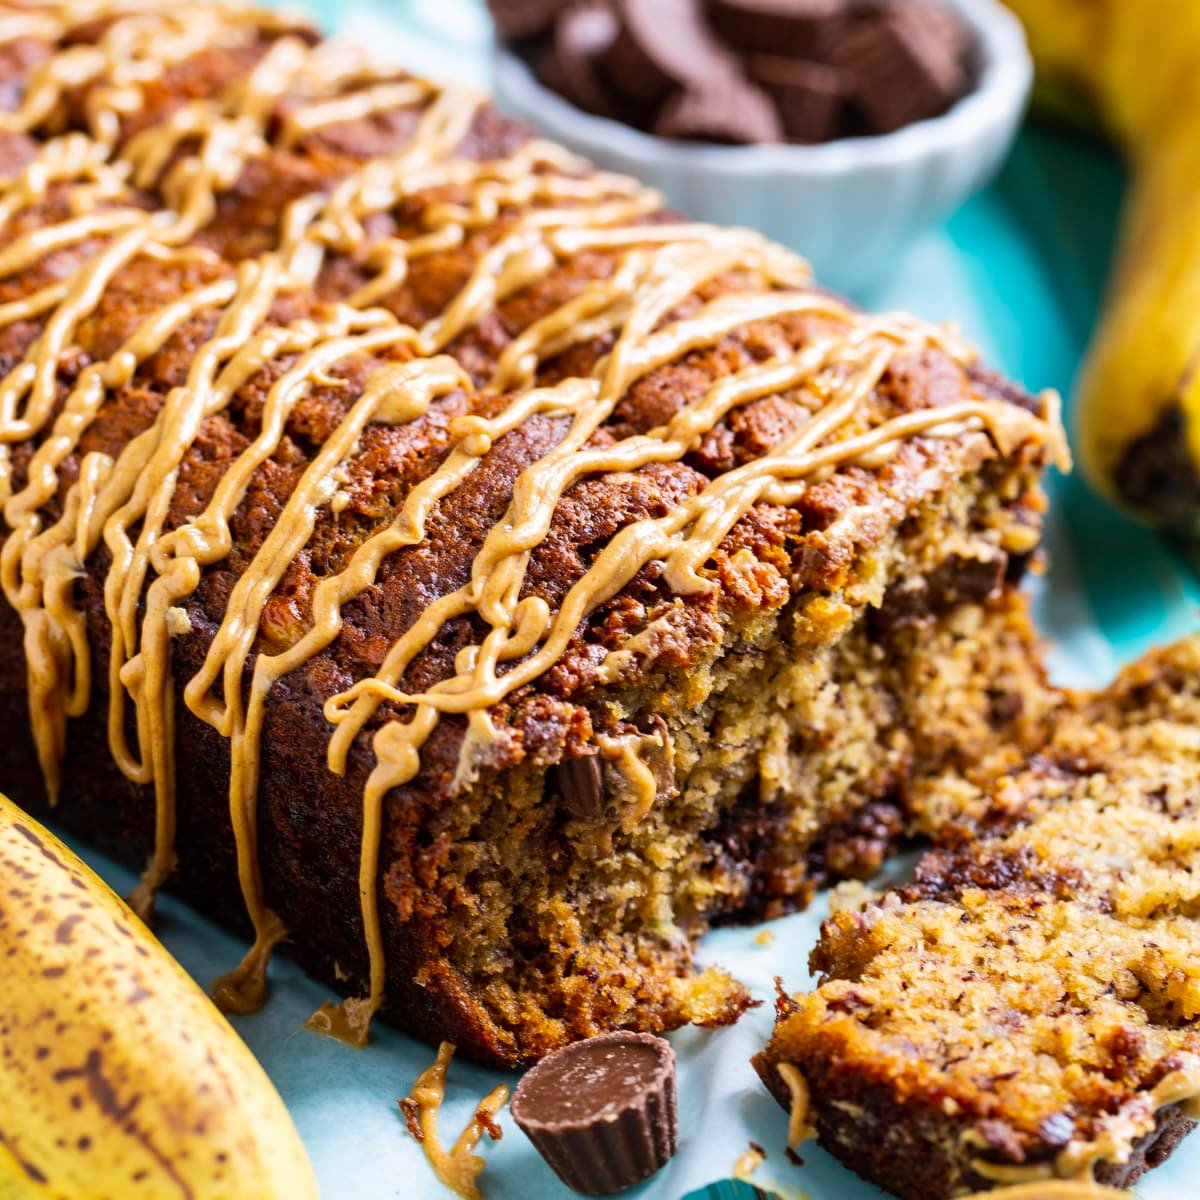 Peanut Butter Cup Banana Bread with slice cut.